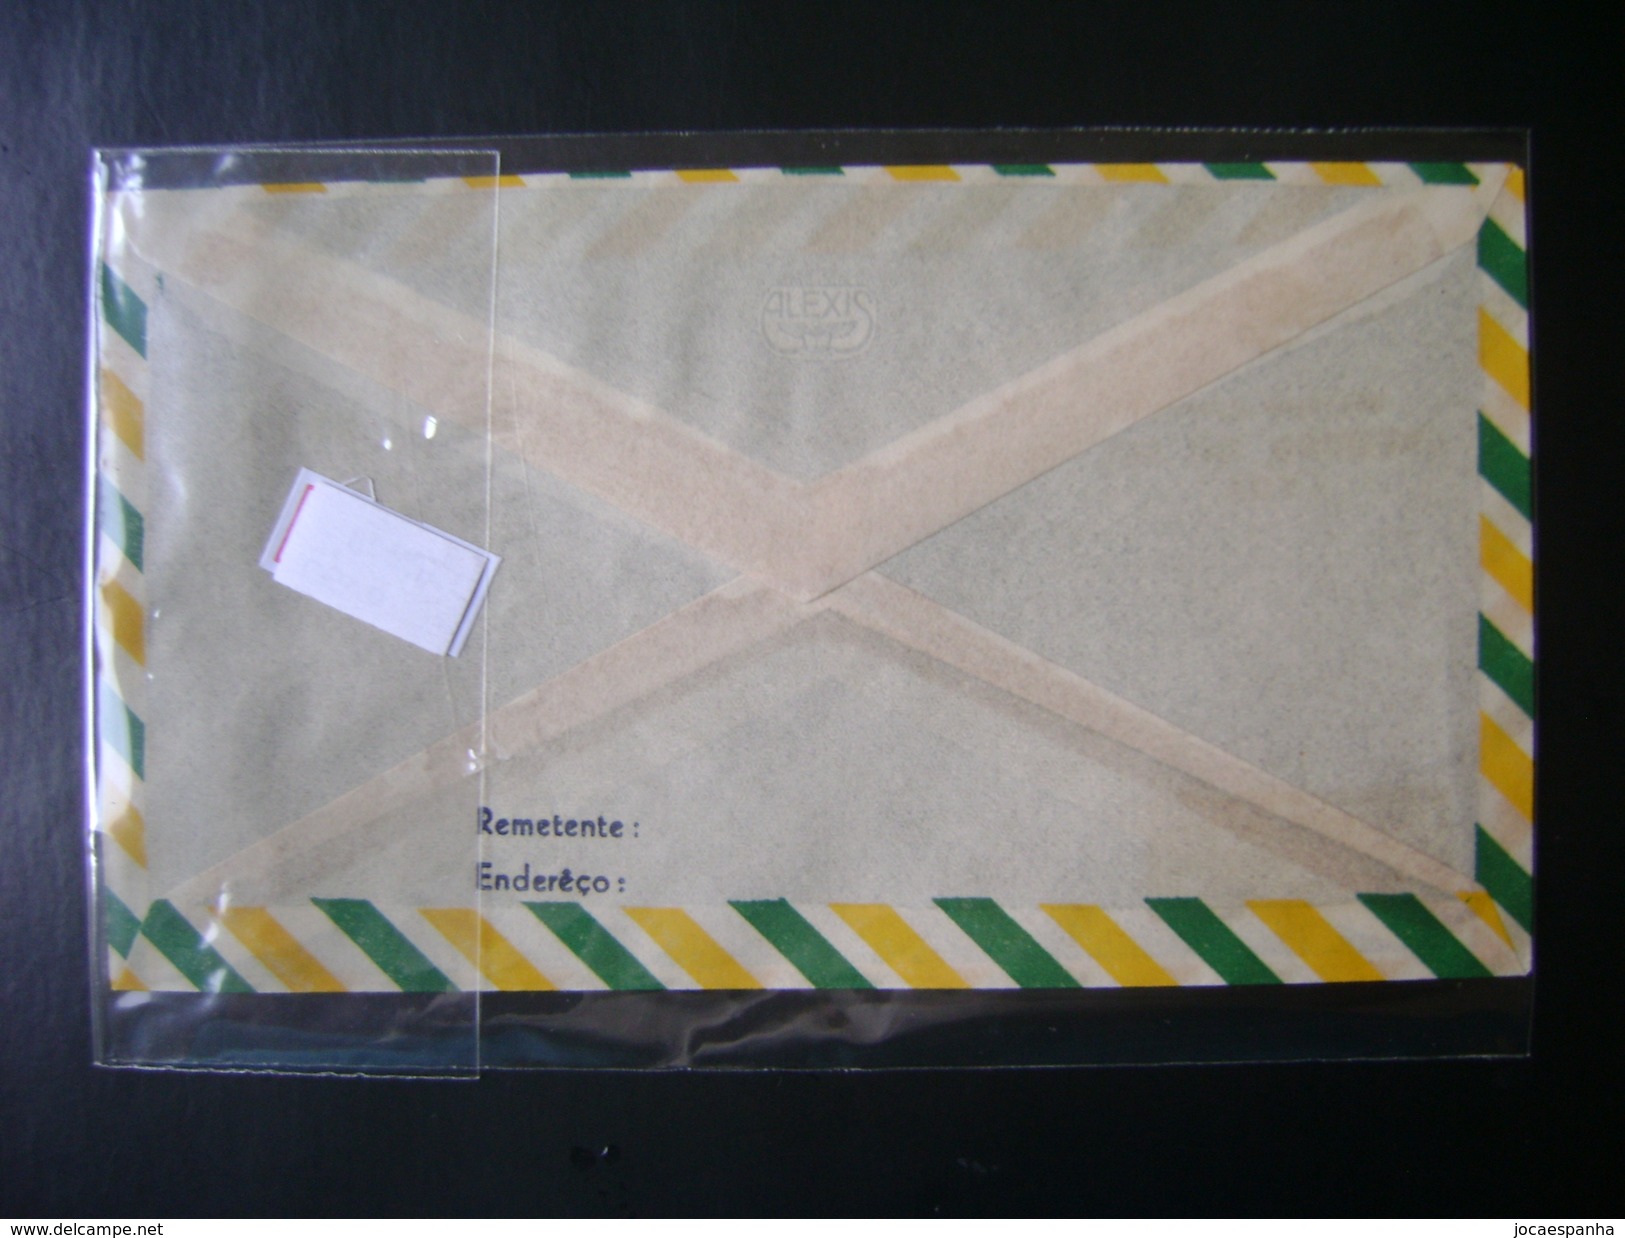 SOUTH CRUISE (CRUZEIRO DO SUL)  AIR SERVICES (BRAZIL), OFFICIAL ENVELOPE OF THE COMPANY - Playing Cards